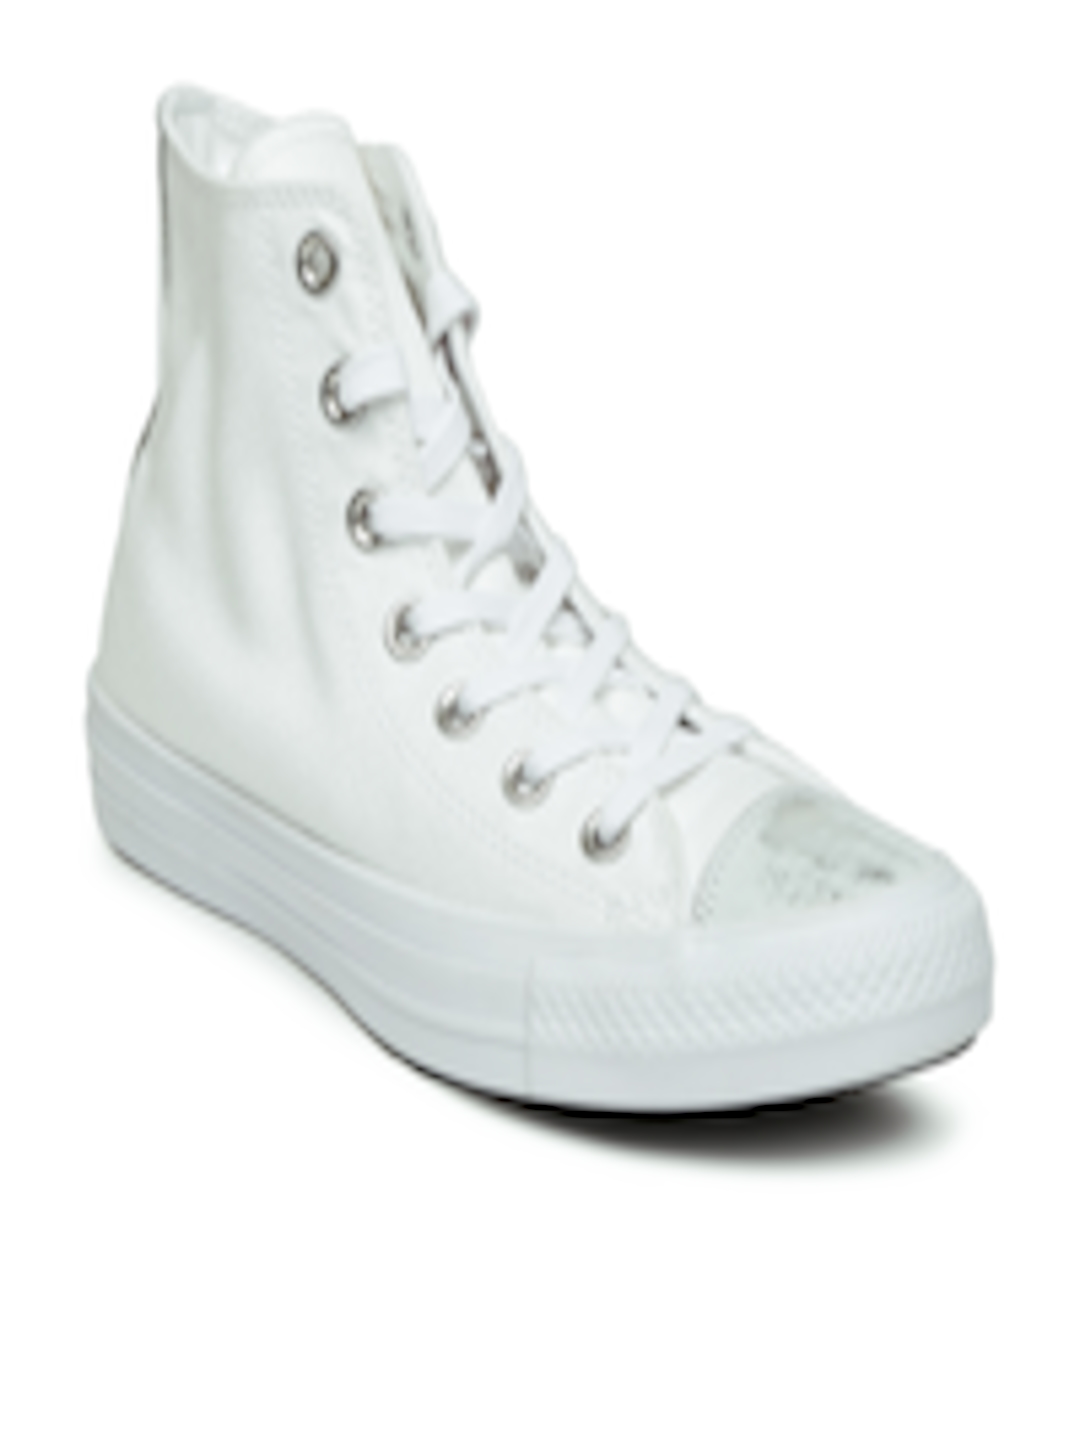 Buy Converse Women White Solid High Tops Sneakers Casual